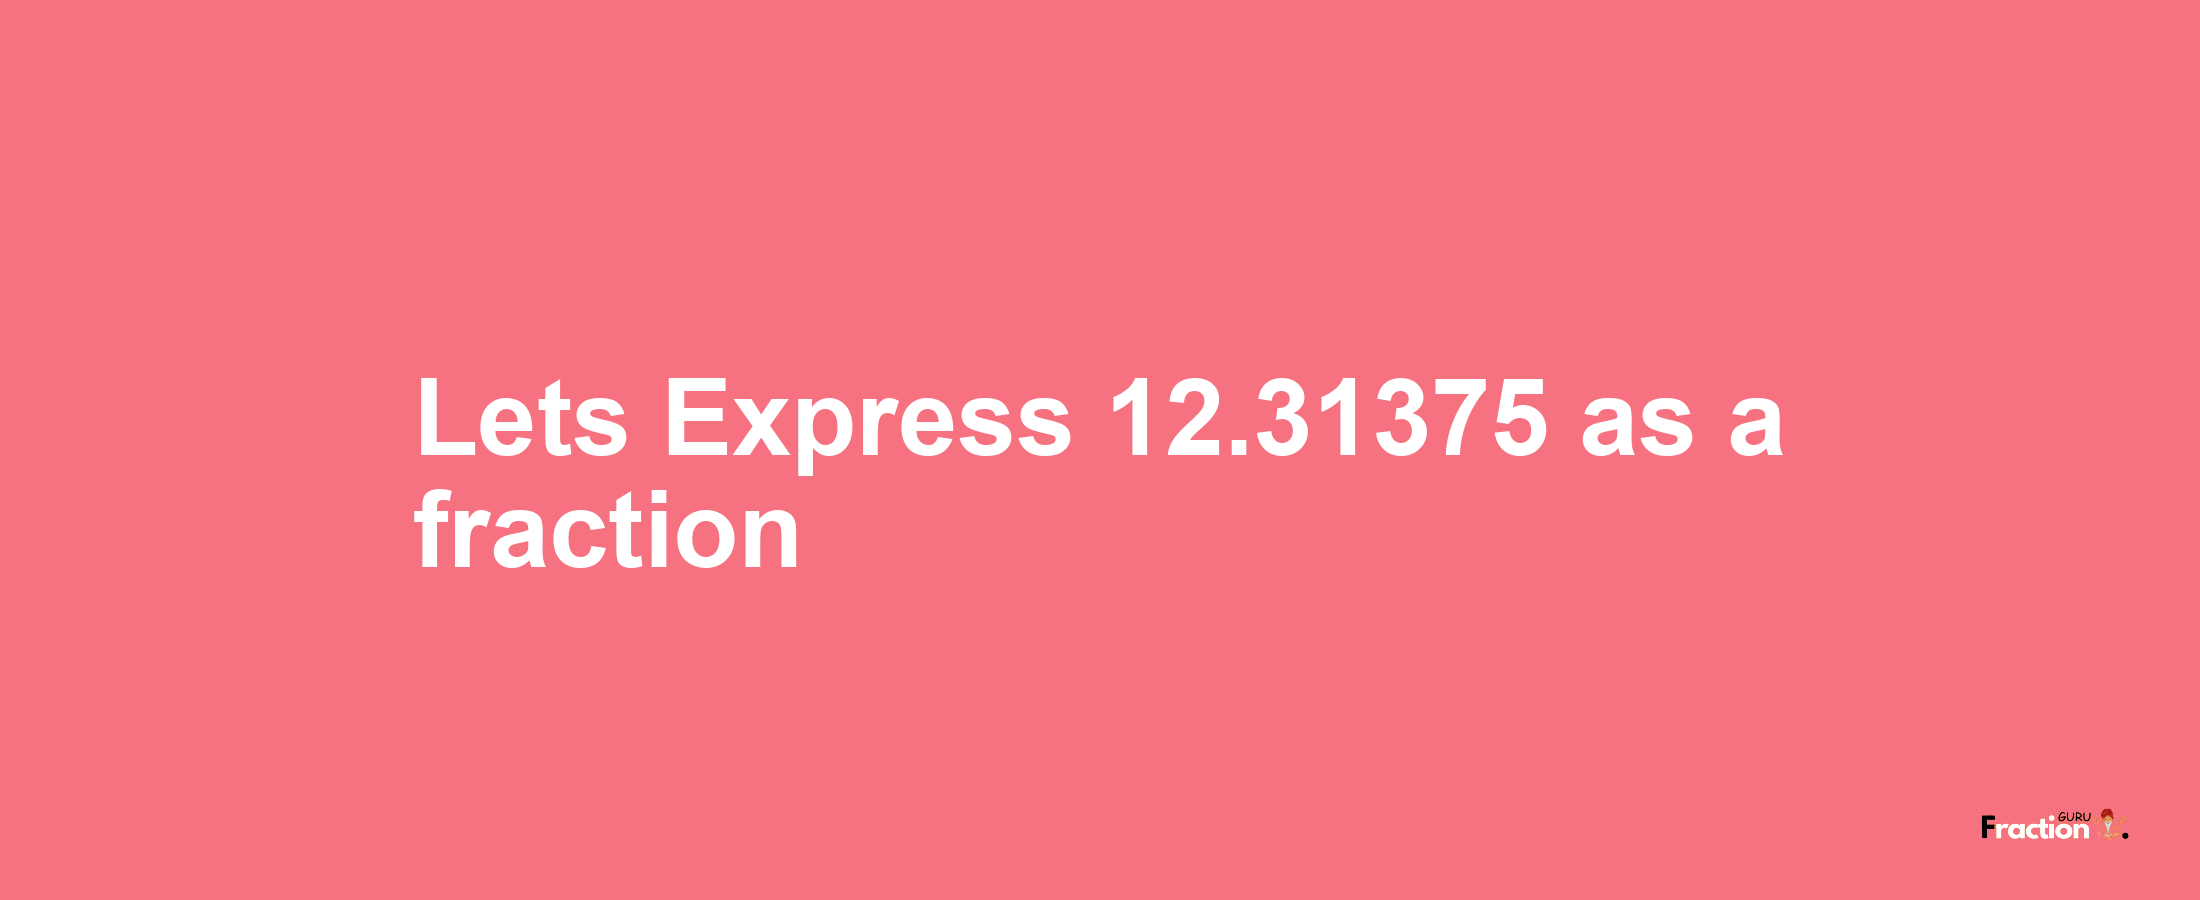 Lets Express 12.31375 as afraction